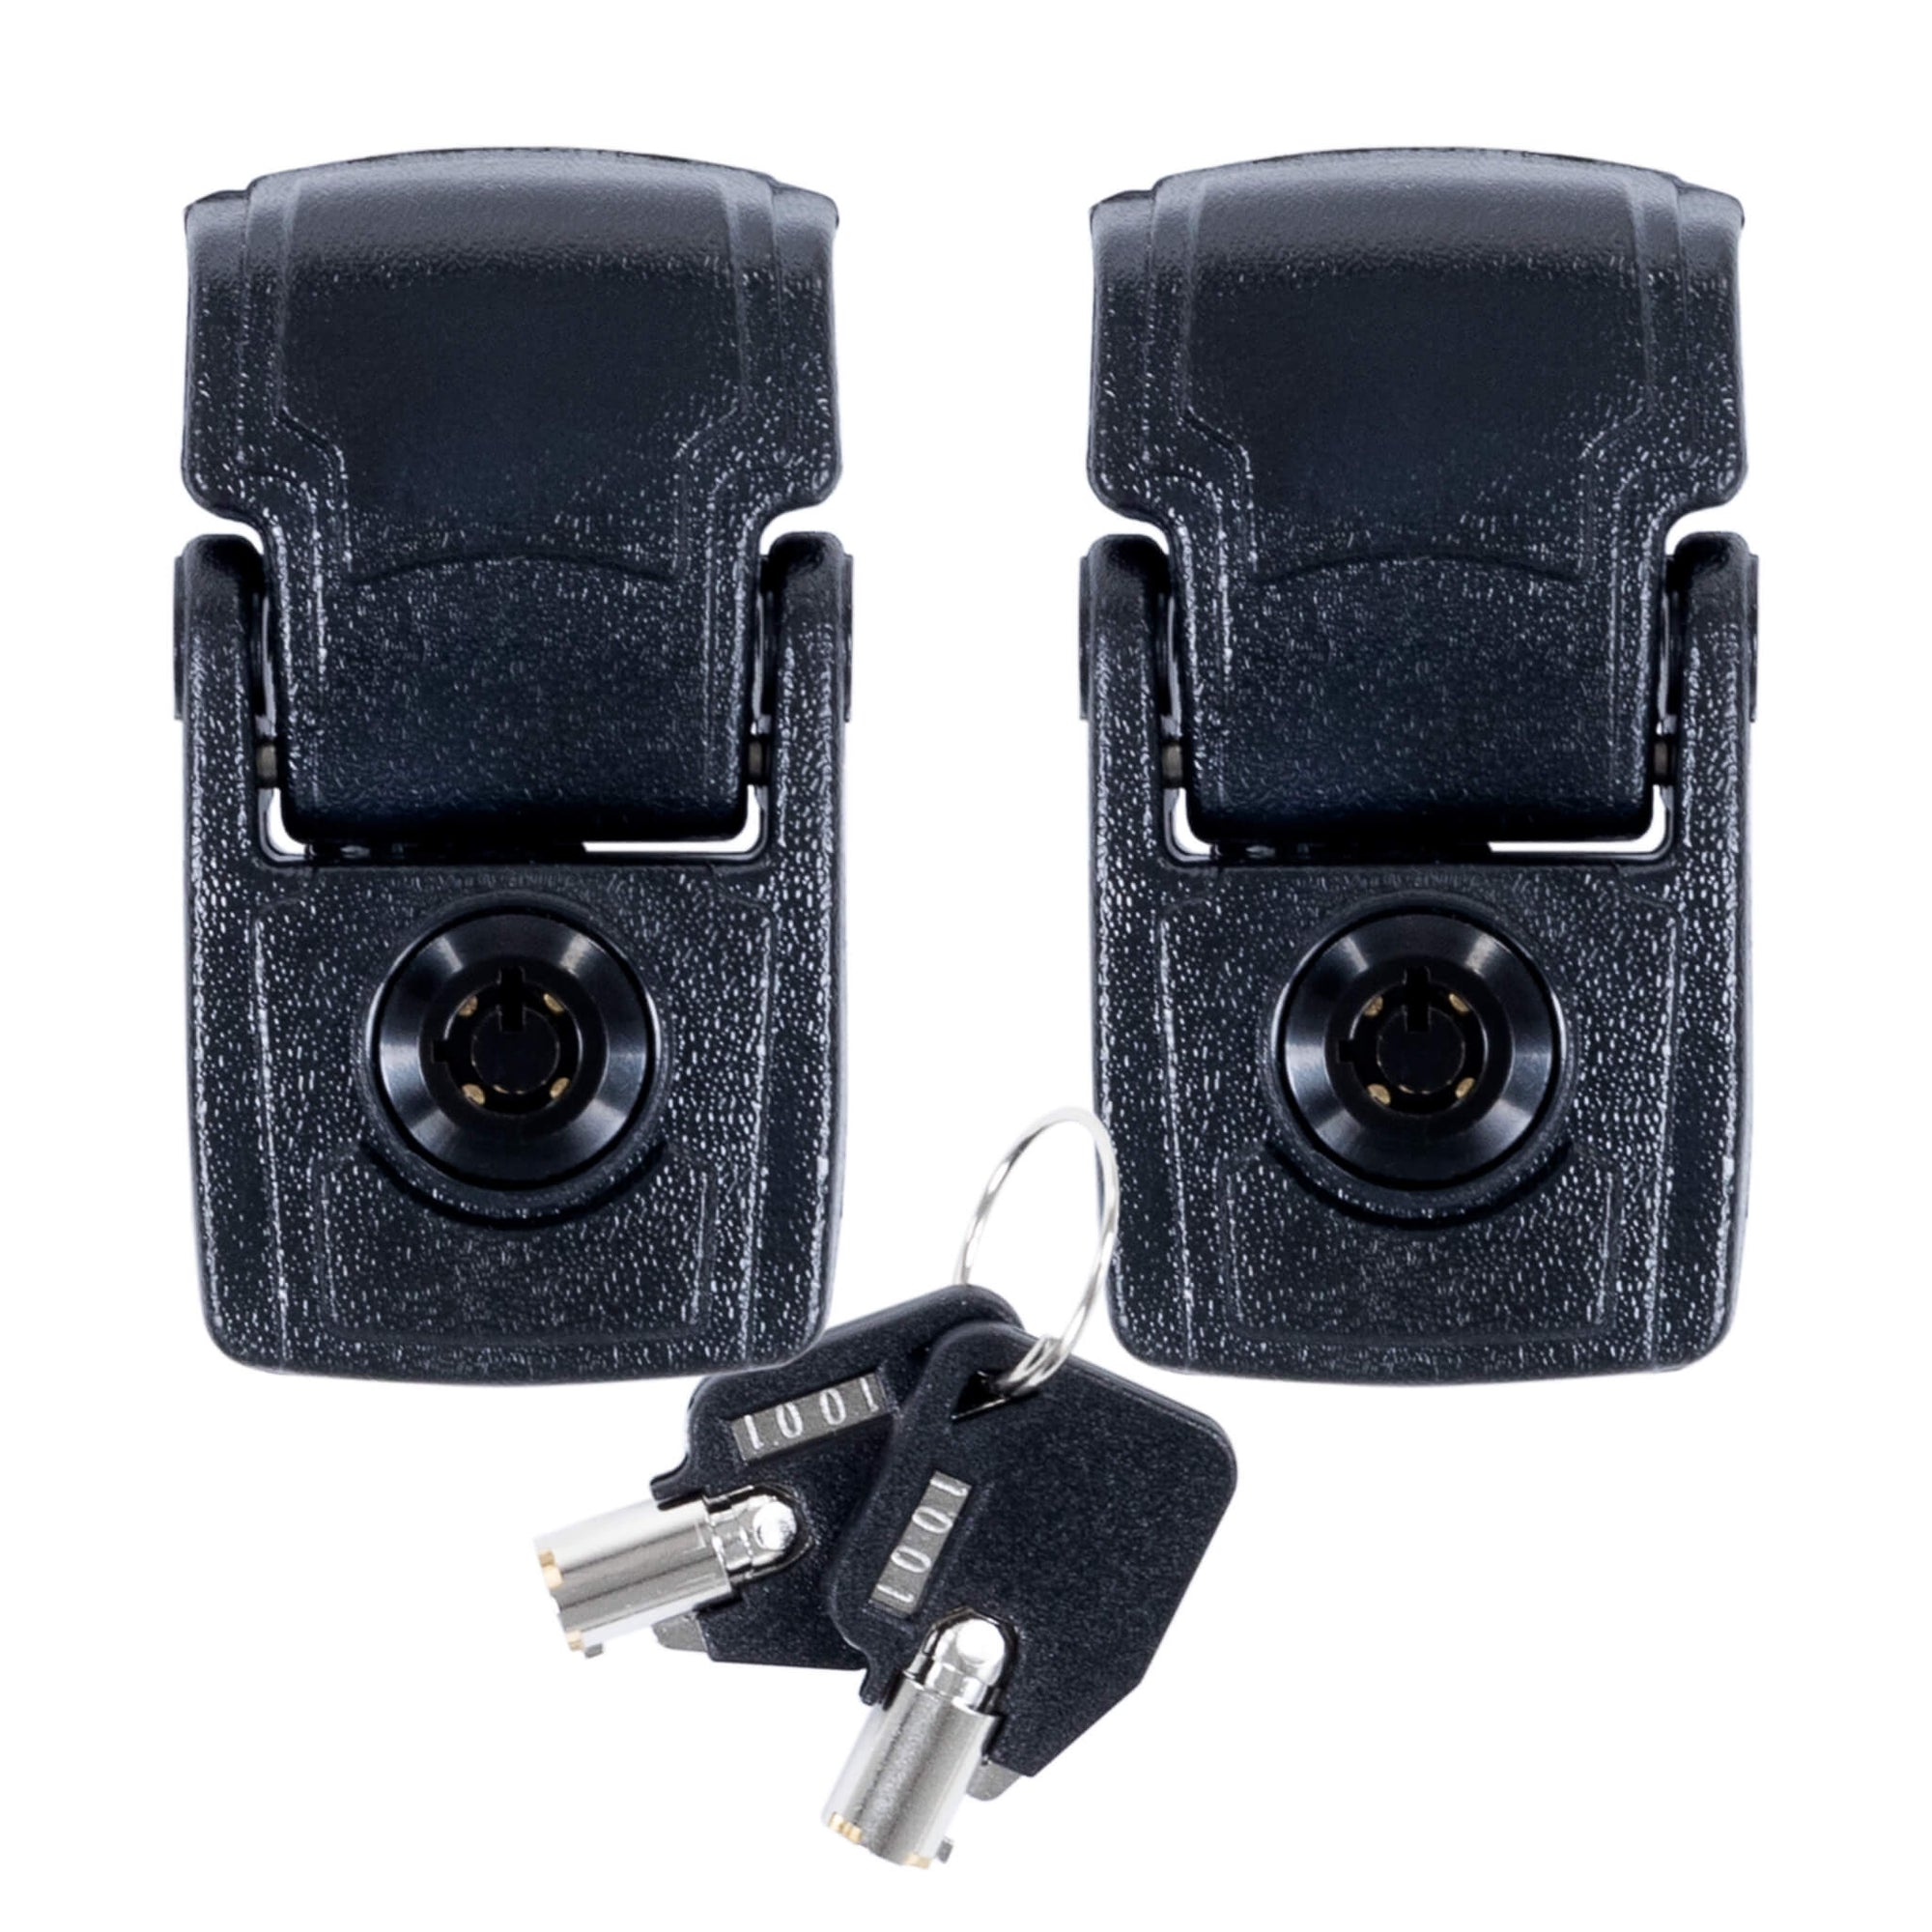 Pelican 1470 Replacement Locking Latches, Black (Set of 2 with Keys) ColorCase 